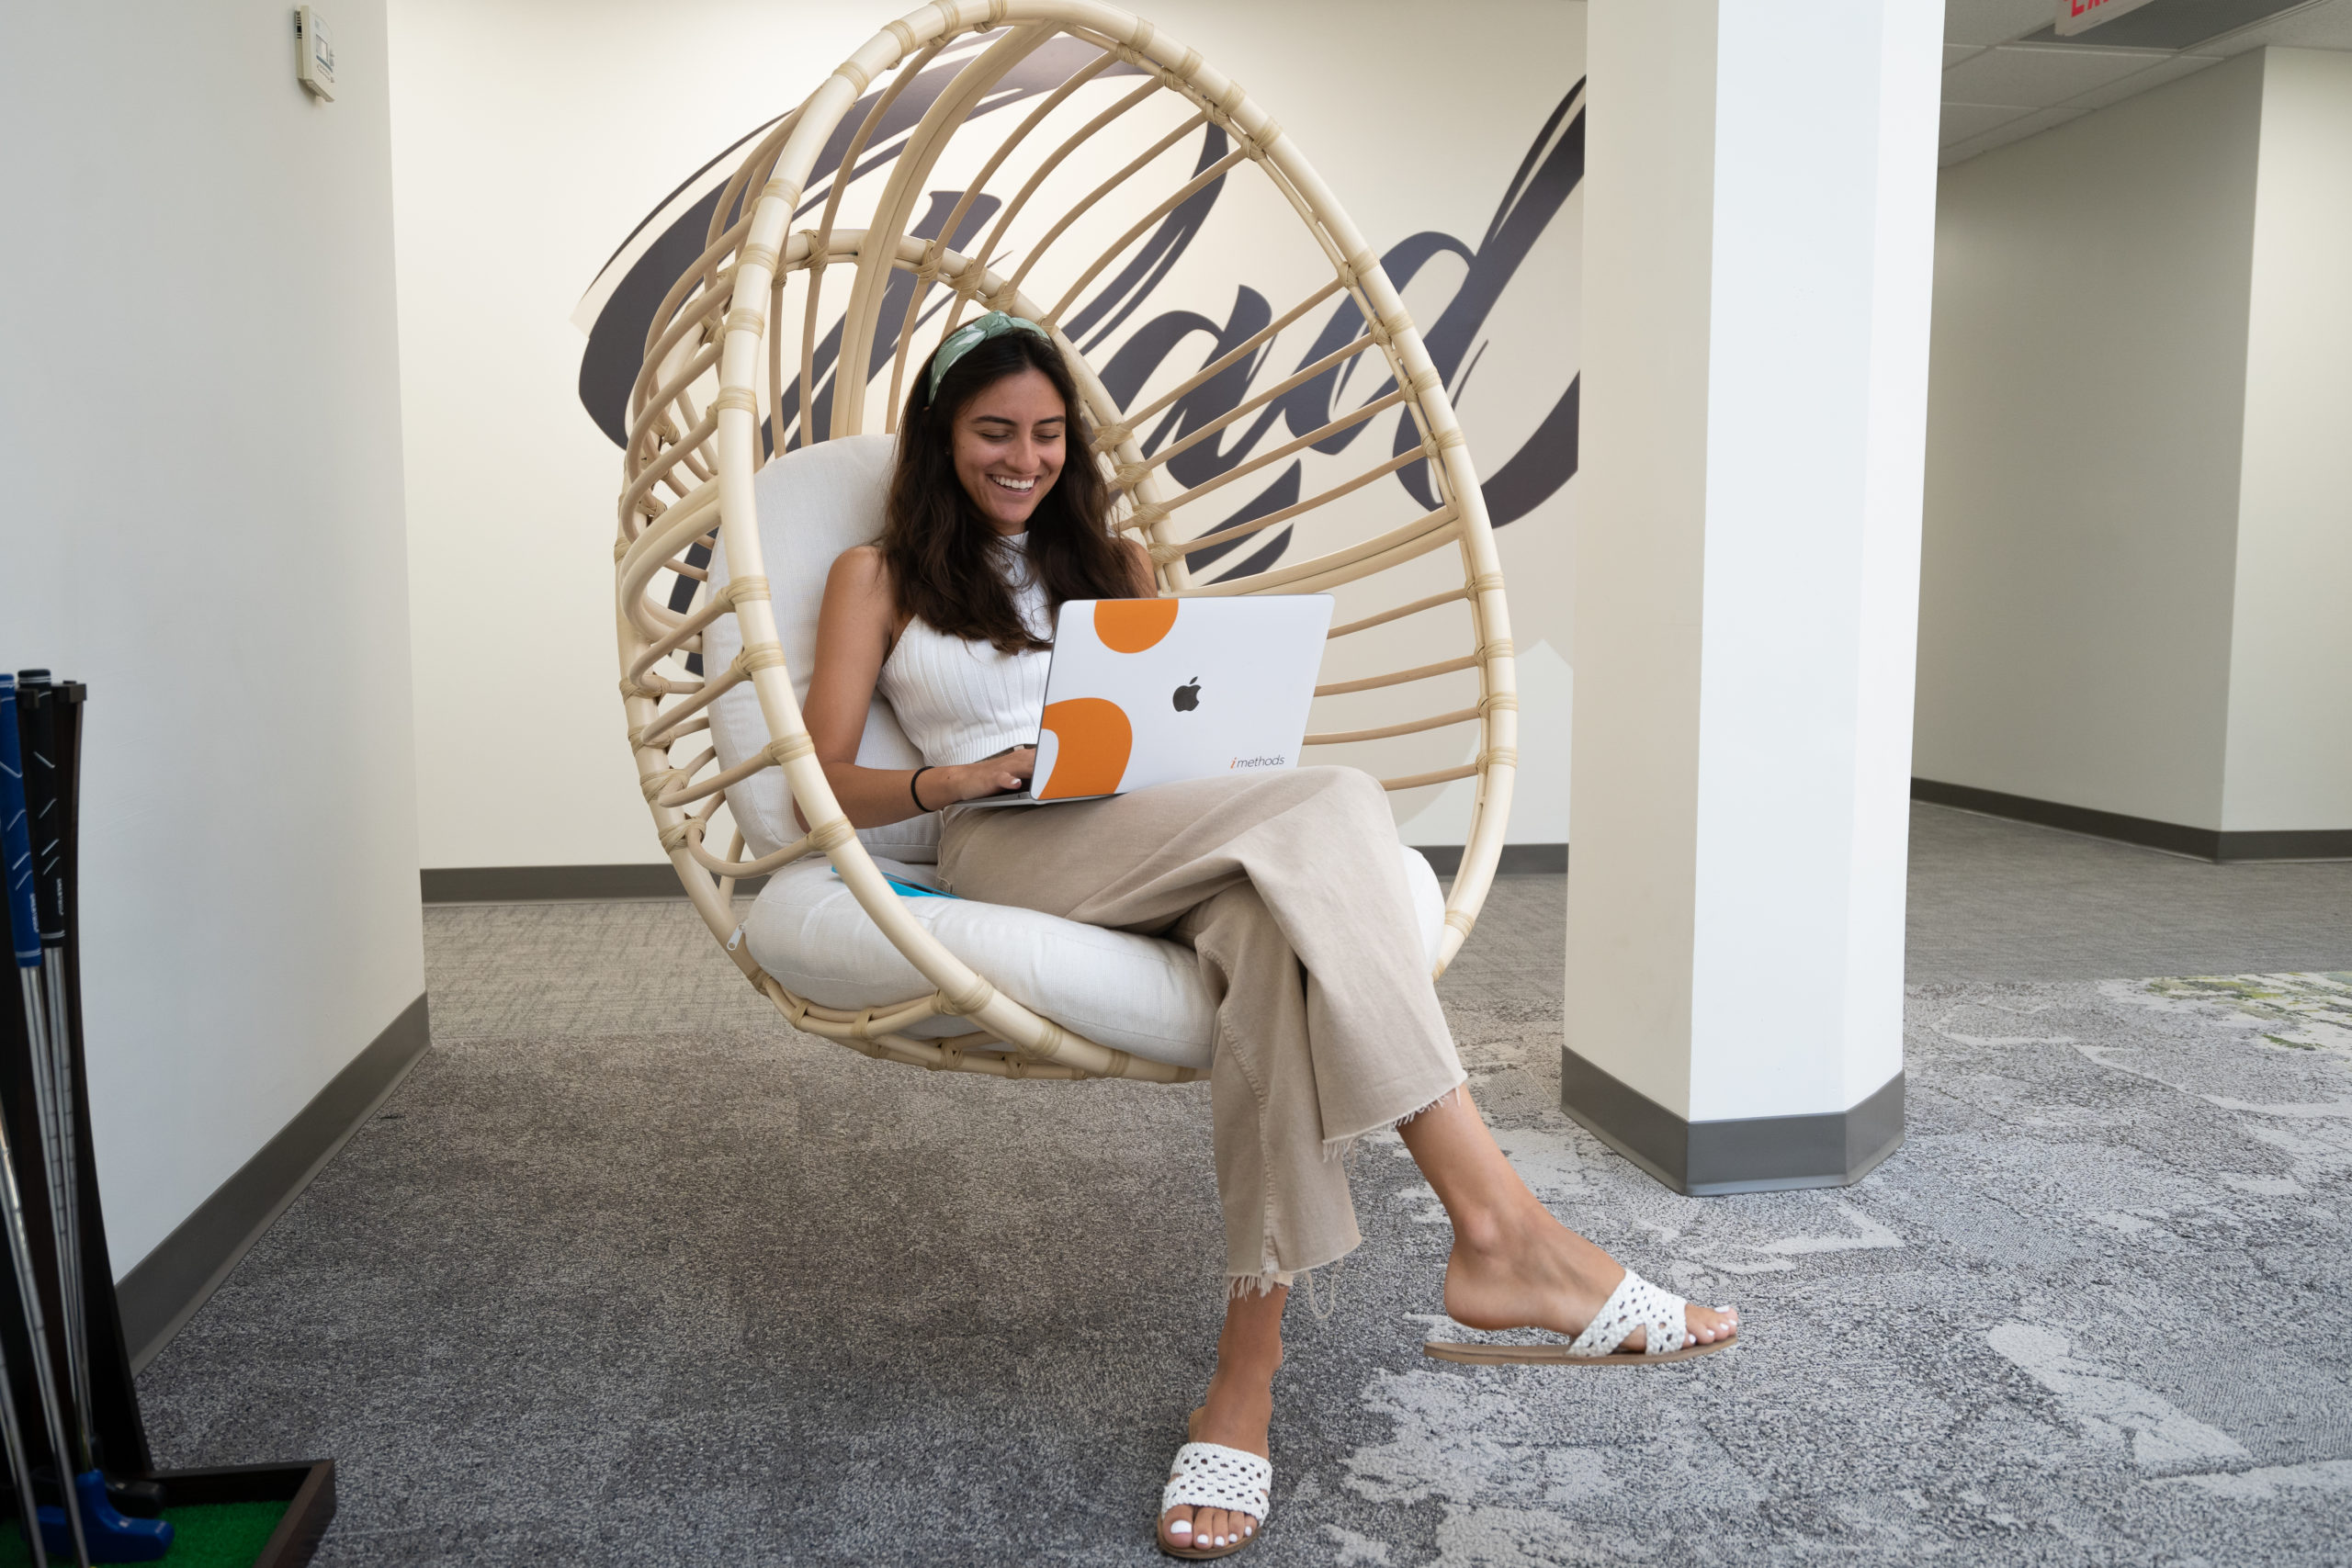 Search for career opportunities at iMethods and come hang with us in our hanging chairs